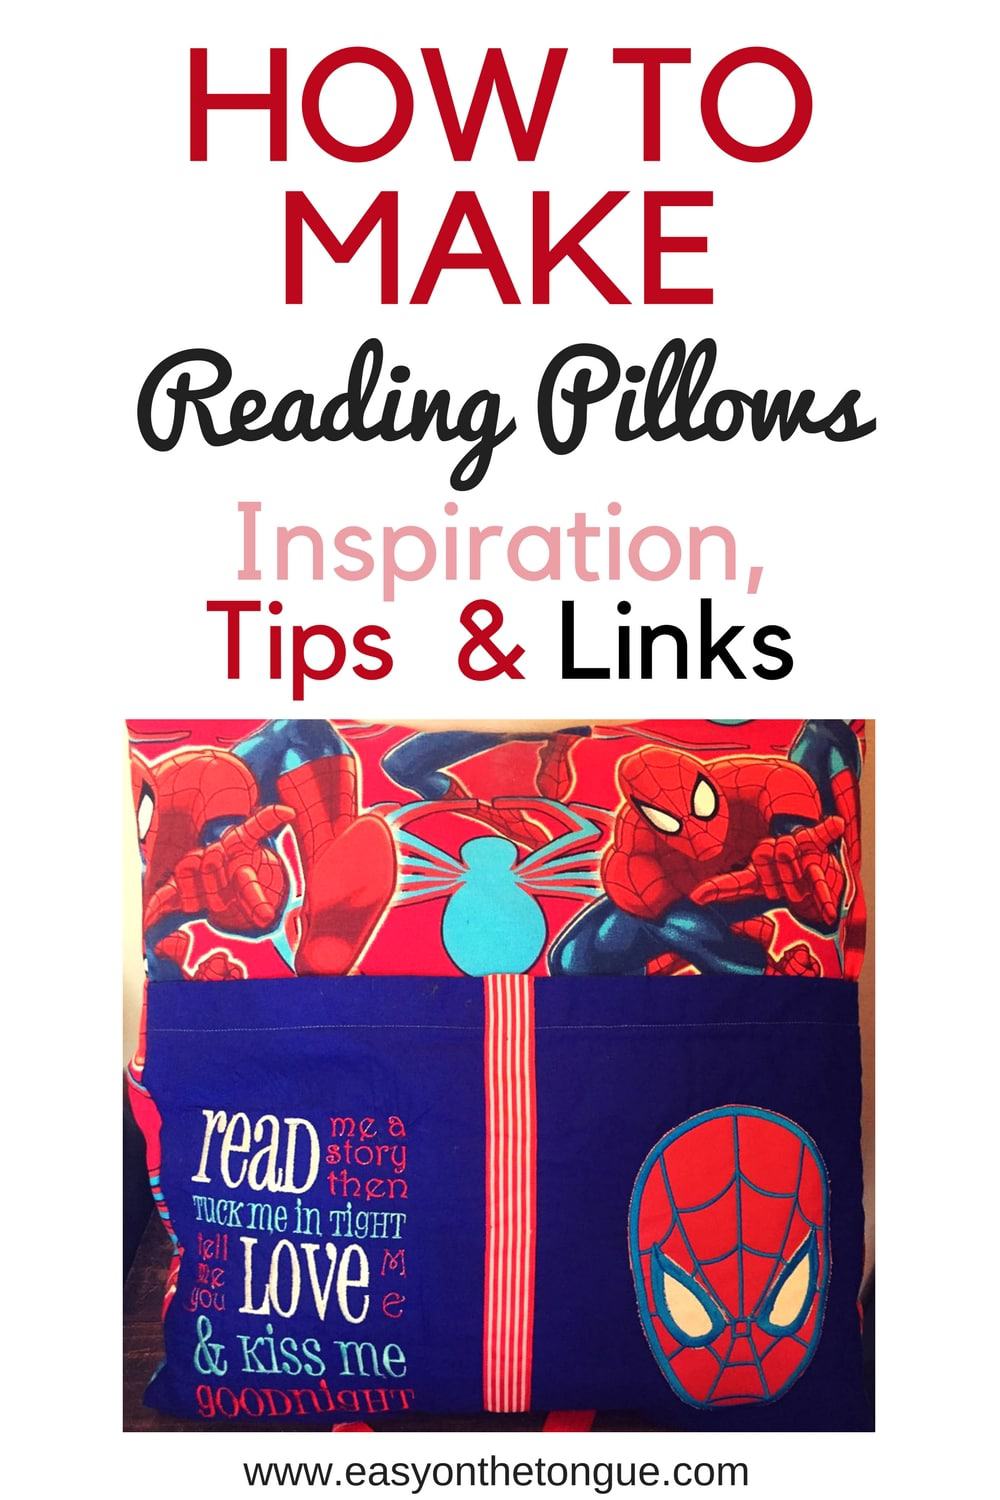 How to make Reading Pillows Inspiration Tips Links more at www.easyonthetongue.com  How to make a ‘My First Christmas’ Tag Blanket